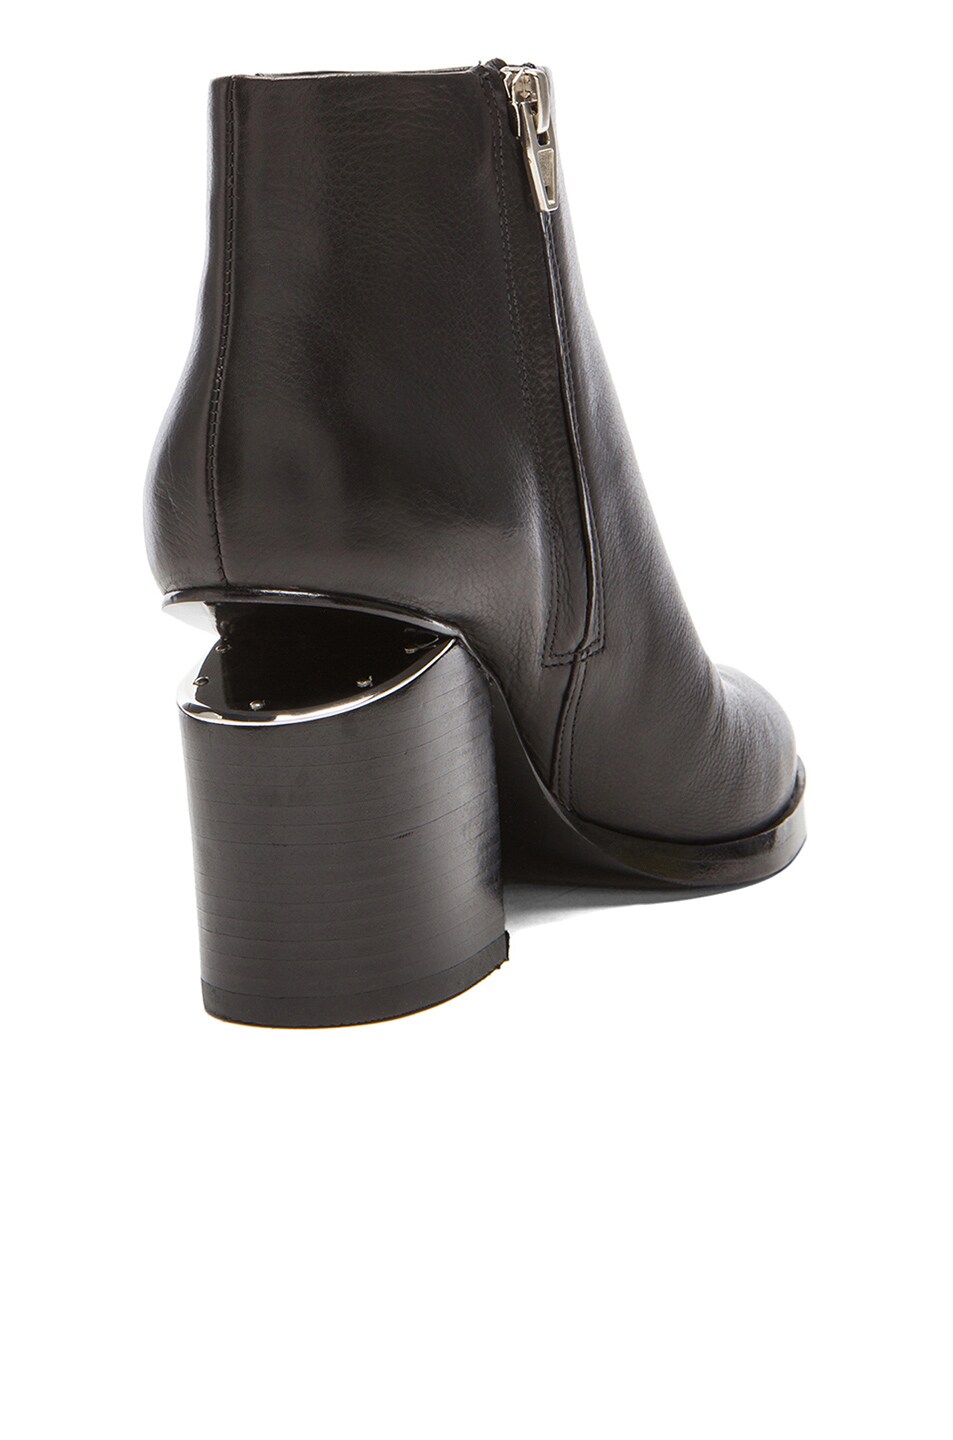 ALEXANDER WANG GABI ANKLE BOOTIES WITH SILVER HARDWARE